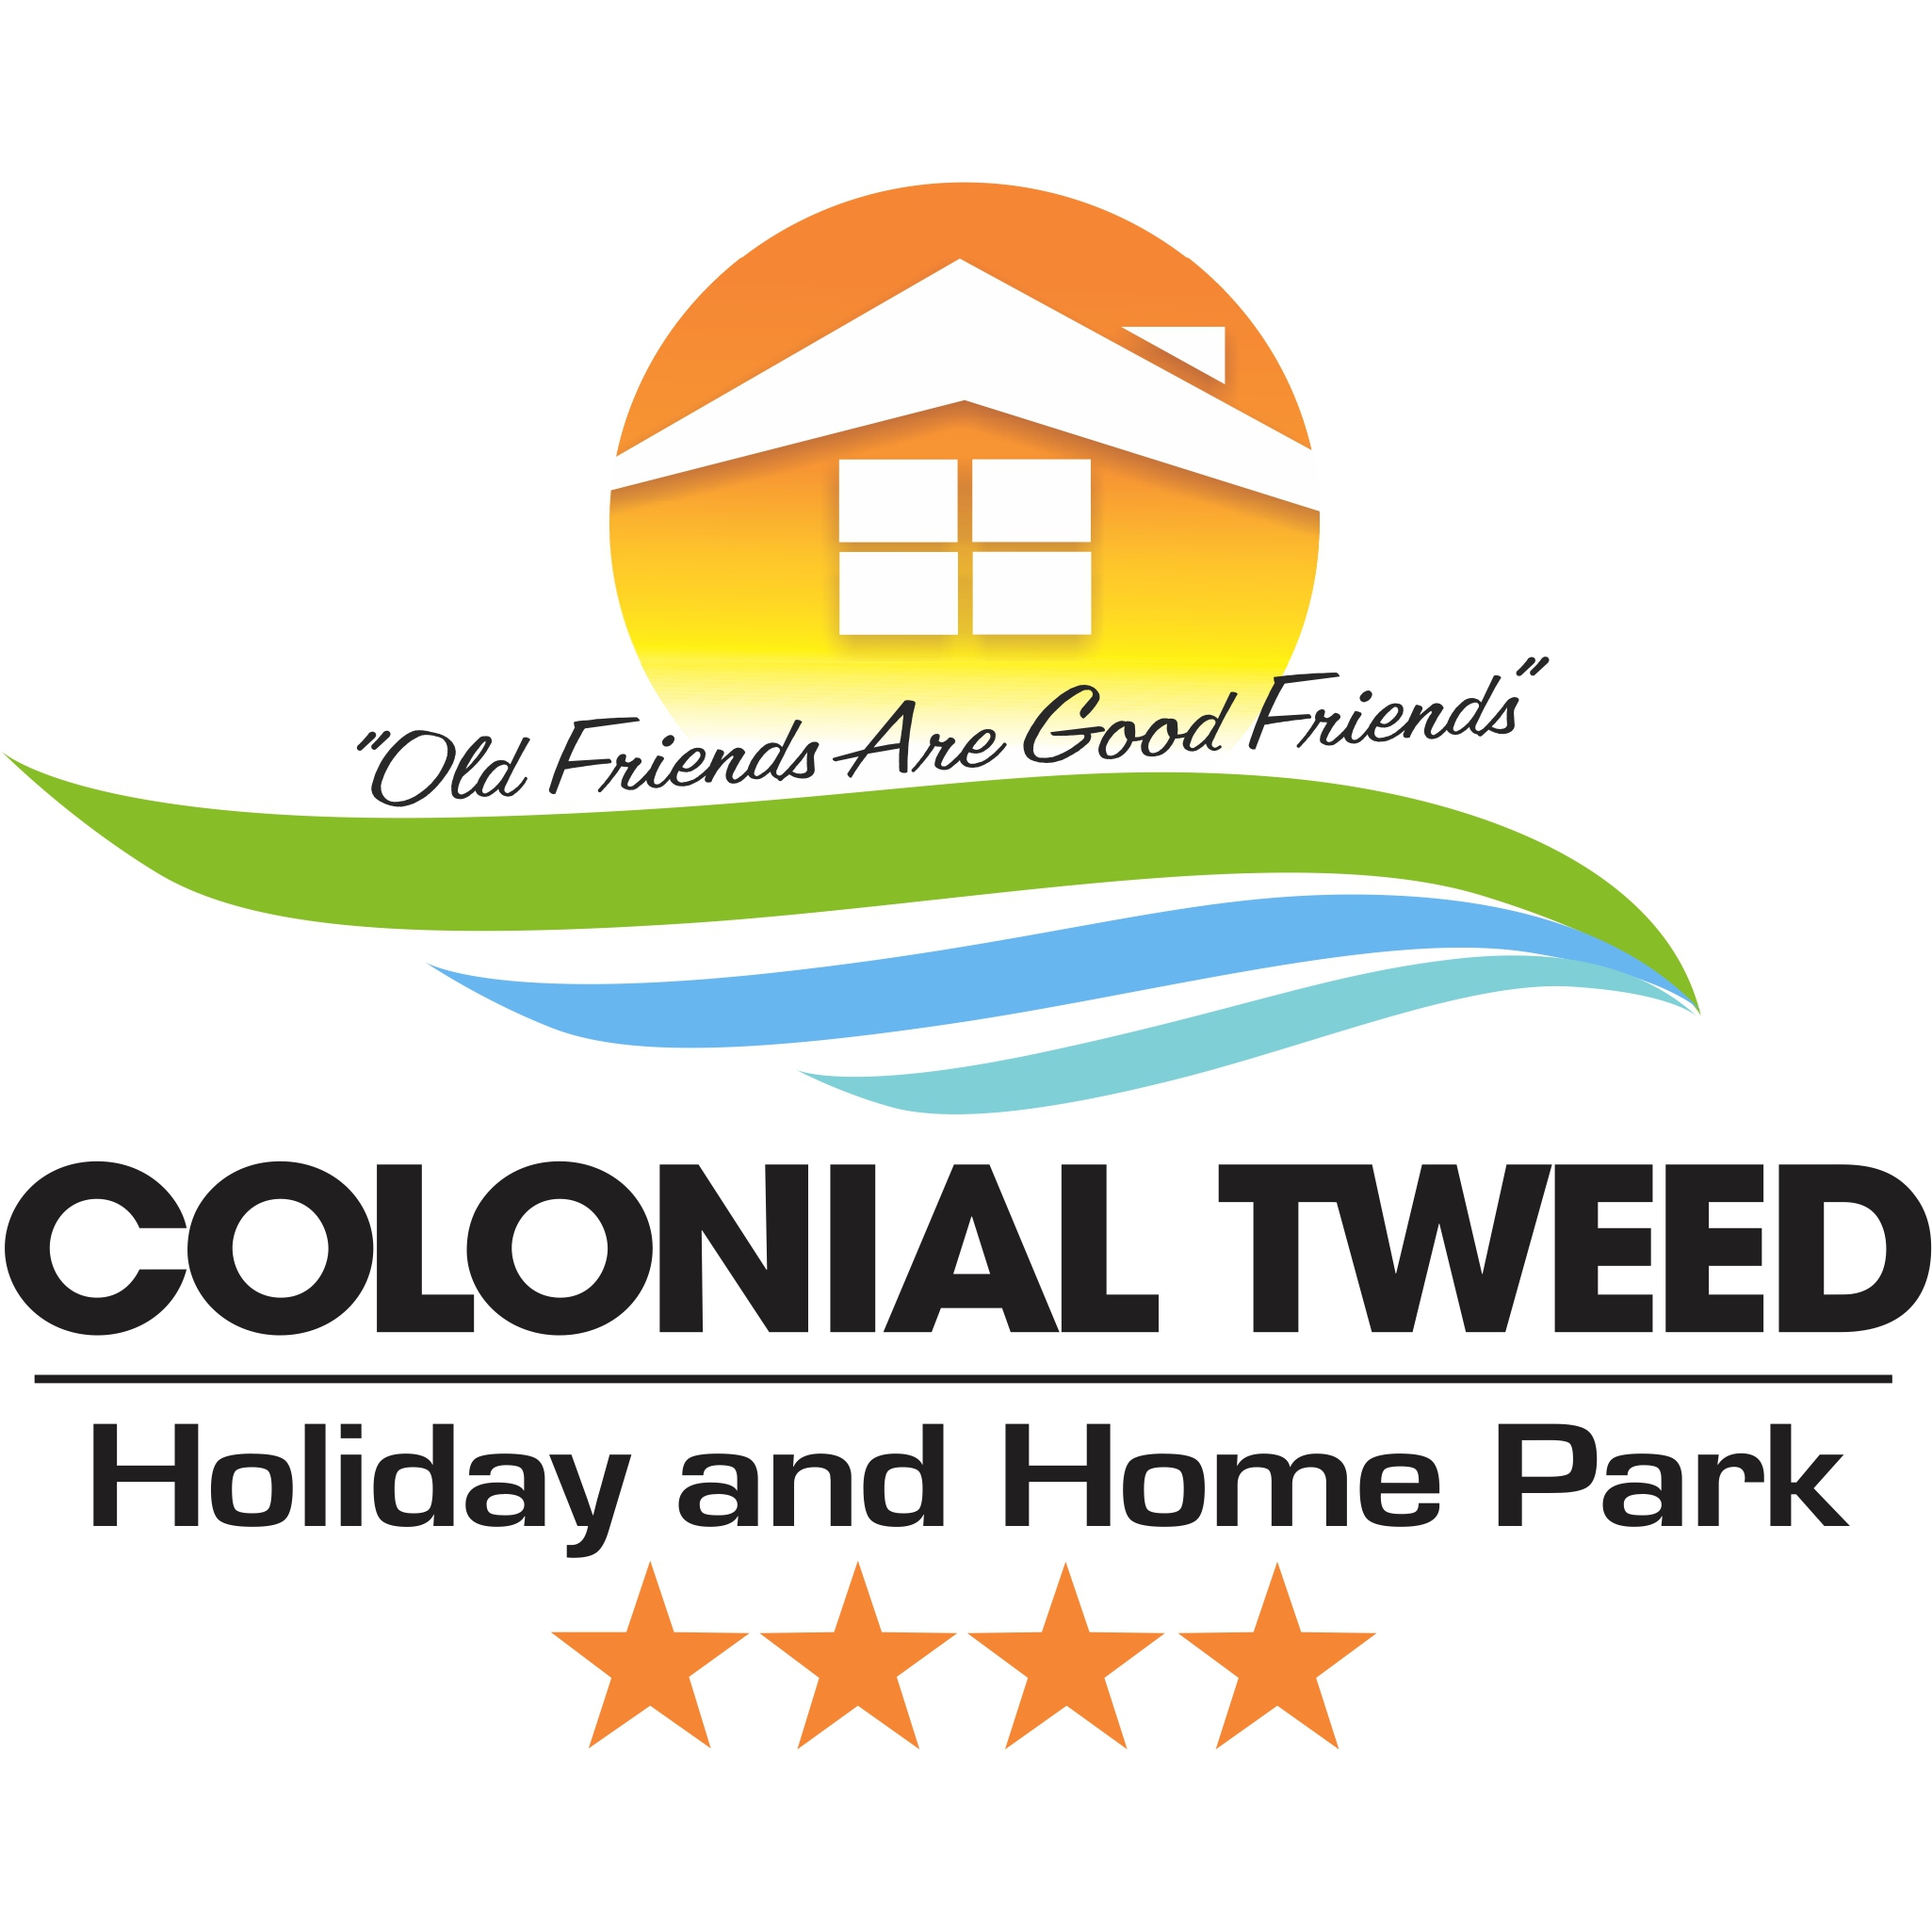 Colonial Tweed Holiday and Home Park - Tweed Heads South, NSW 2486 - (07) 5524 2999 | ShowMeLocal.com